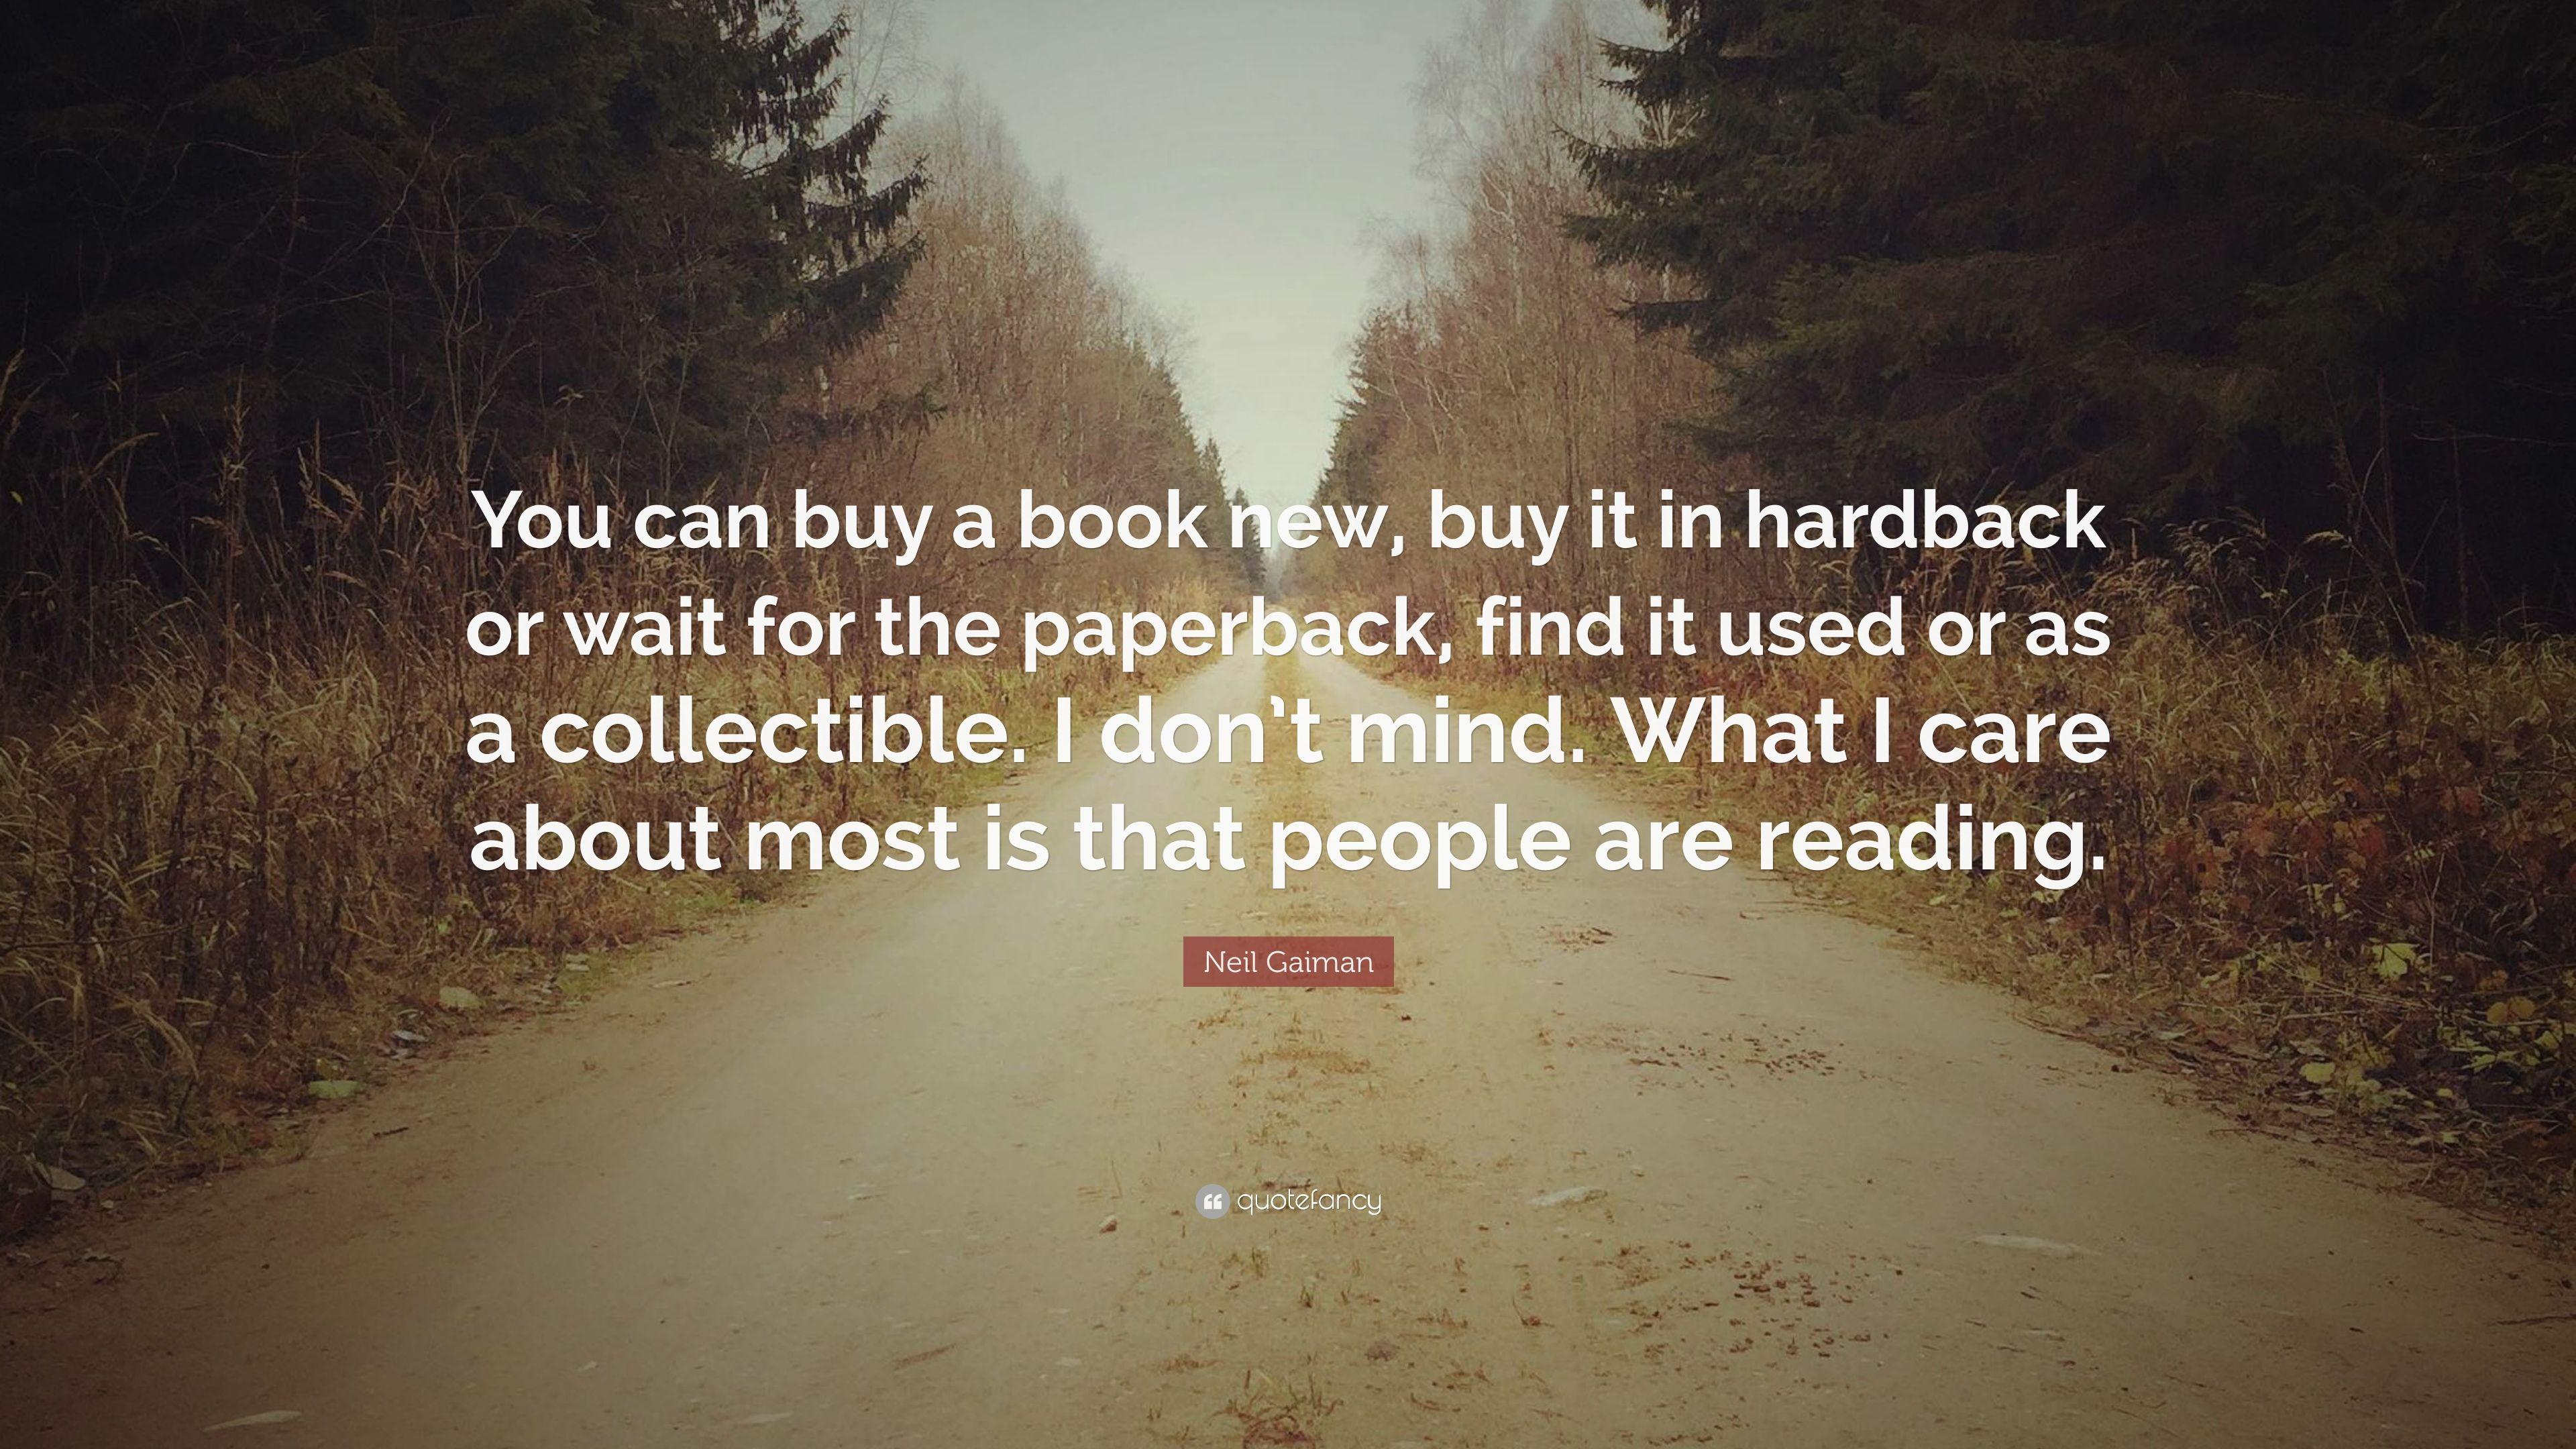 Neil Gaiman Quote: “You can buy a book new, buy it in hardback or